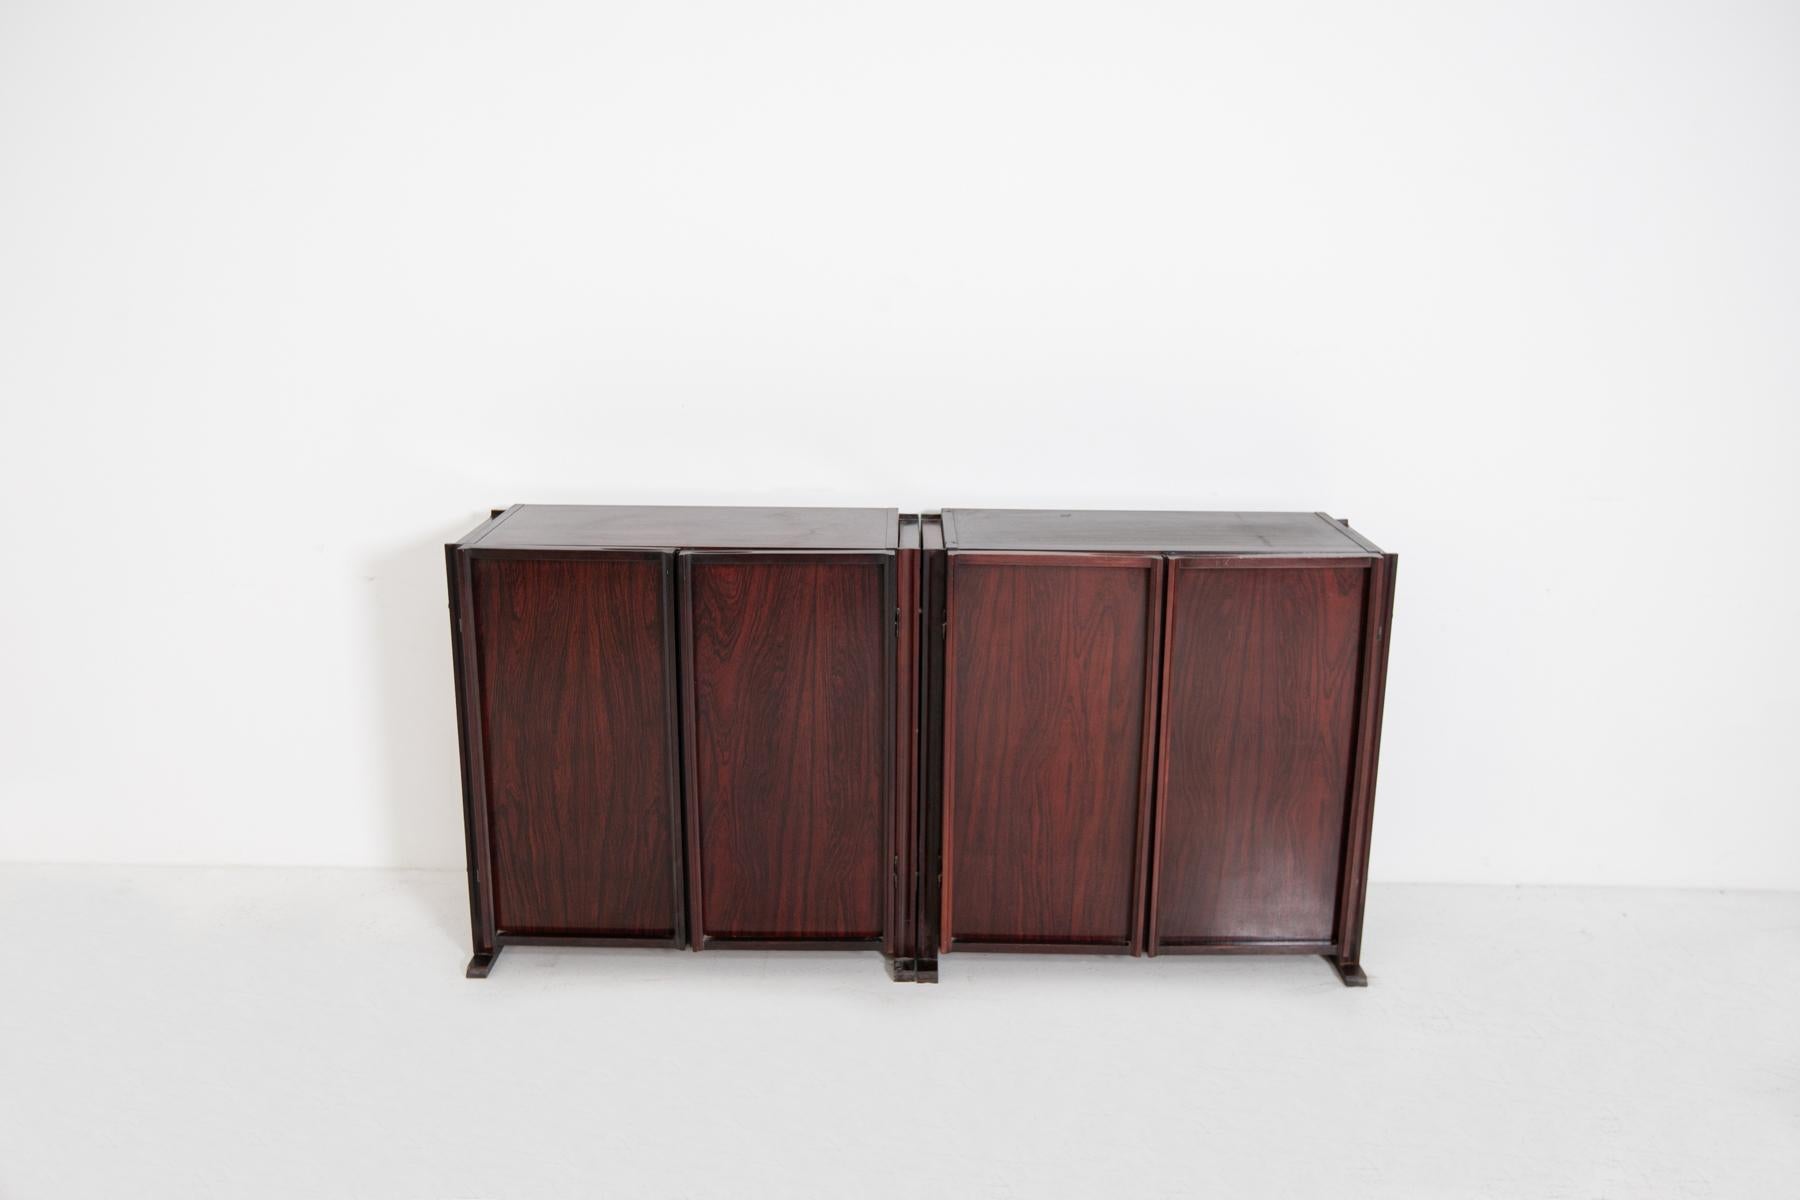 Elegant pair of small sideboards manufactured by Sormani in the 1950s.
The pair of elegant modular sideboards. The sideboard is formed by two small modular sideboards that can be placed side by side and joined together to form a single sideboard,